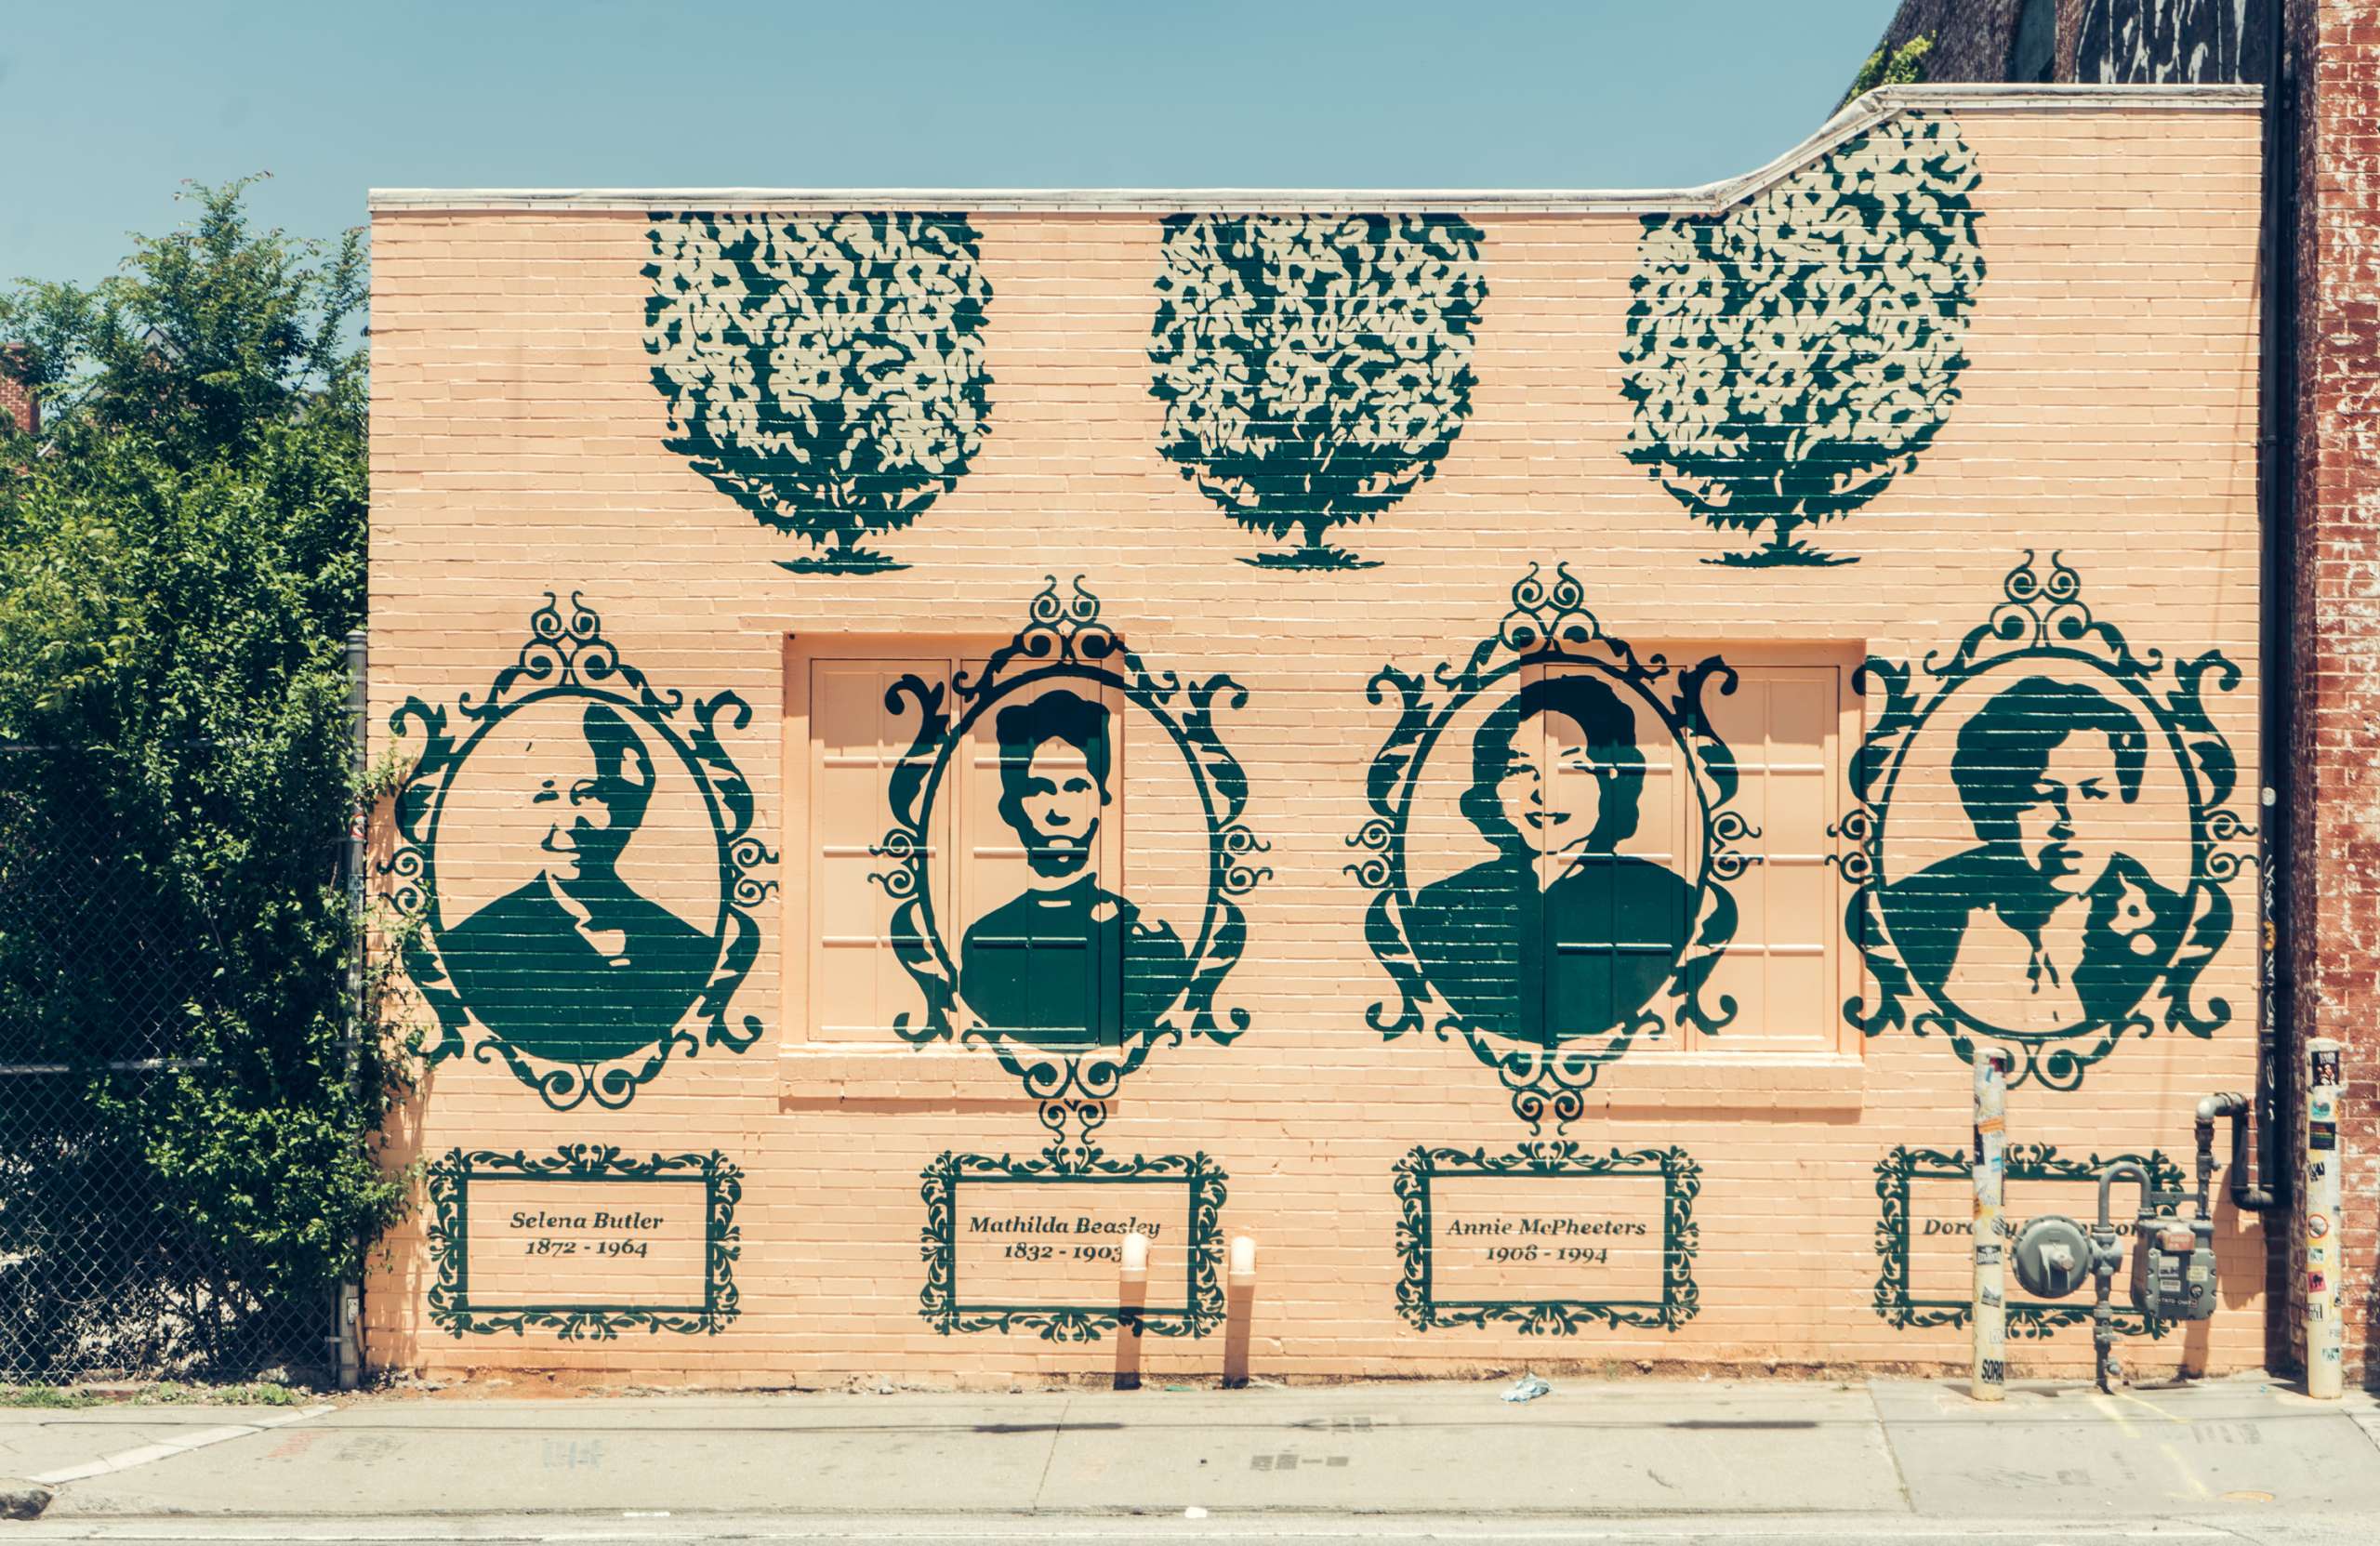 Mural of Civil Rights icons.